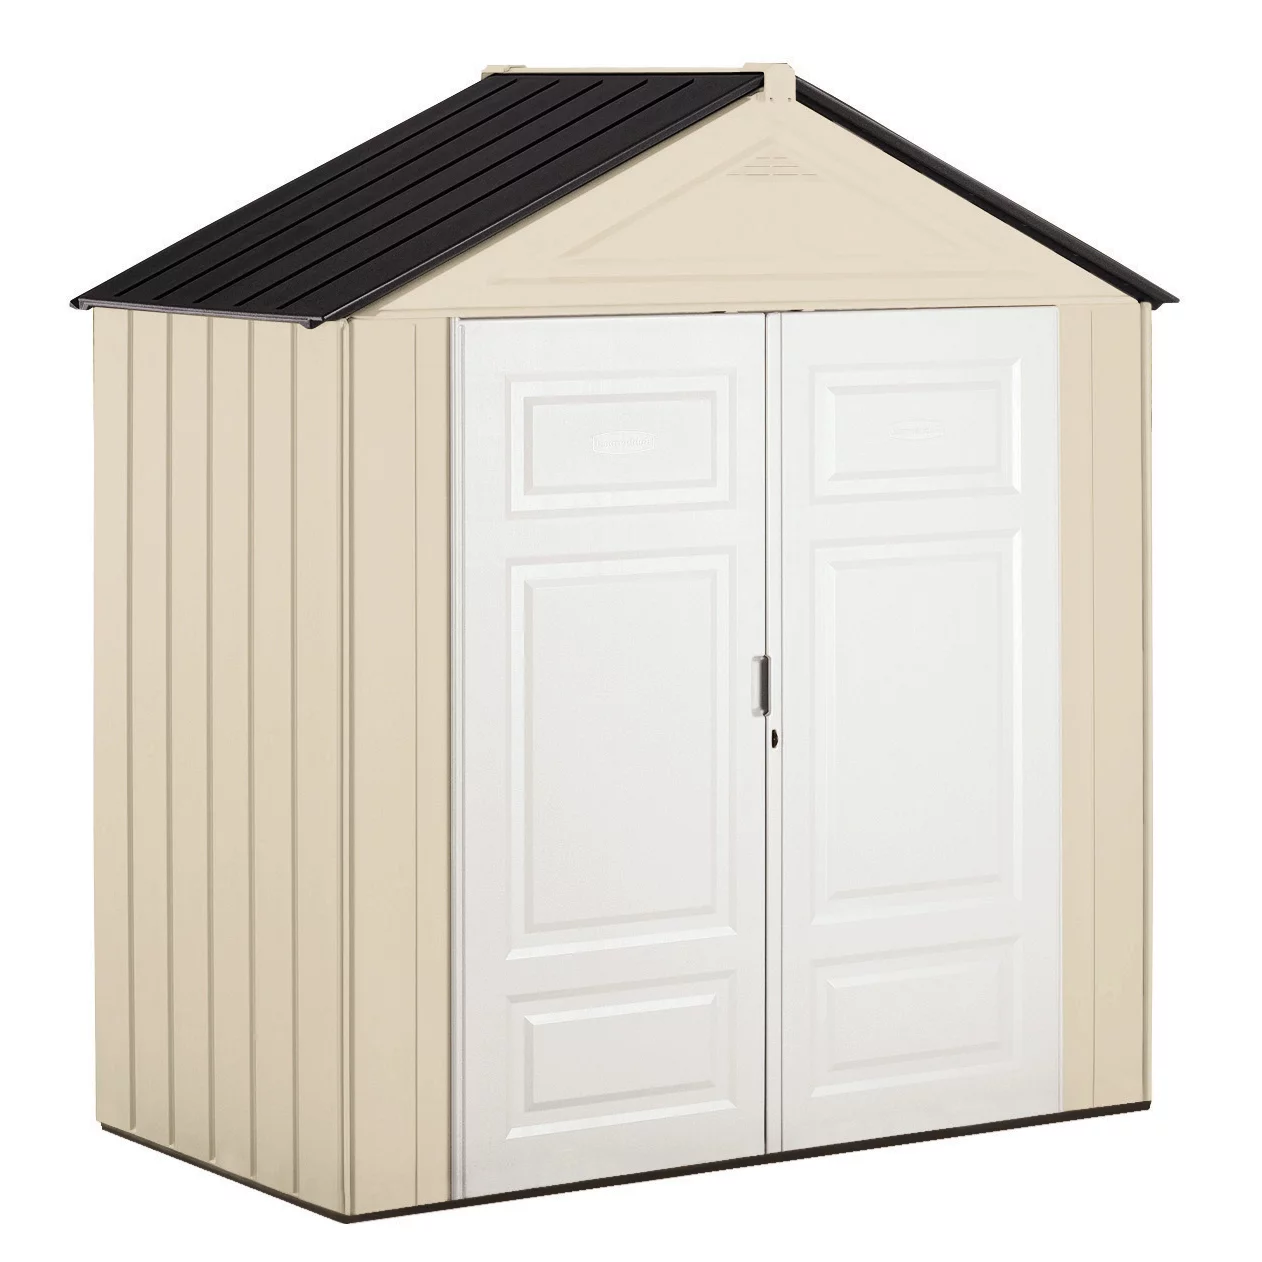 How To Put Together A Rubbermaid Shed